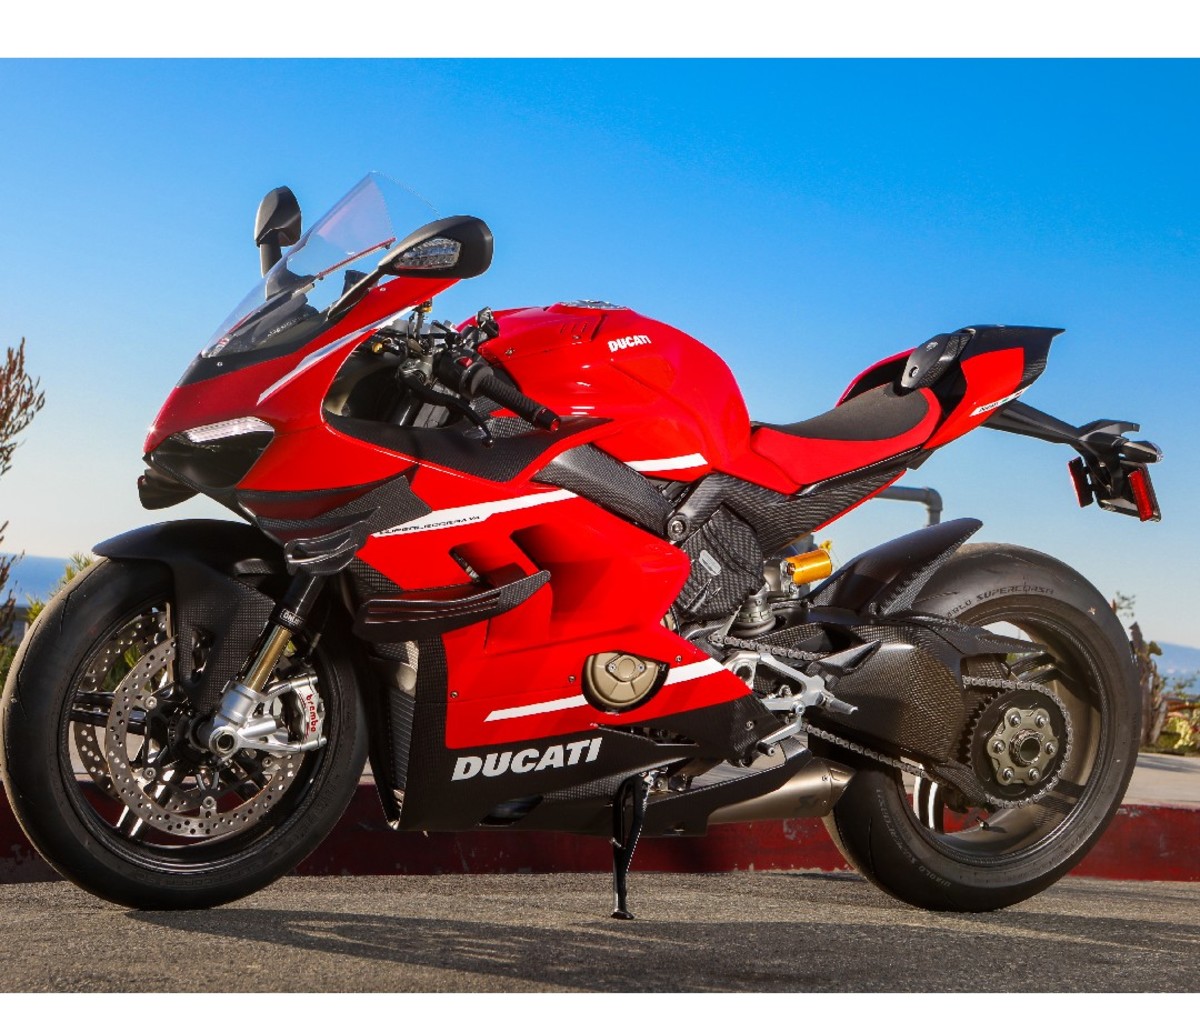 2021 Red Ducati Superleggera V4 motorcycle parked on the road, side image